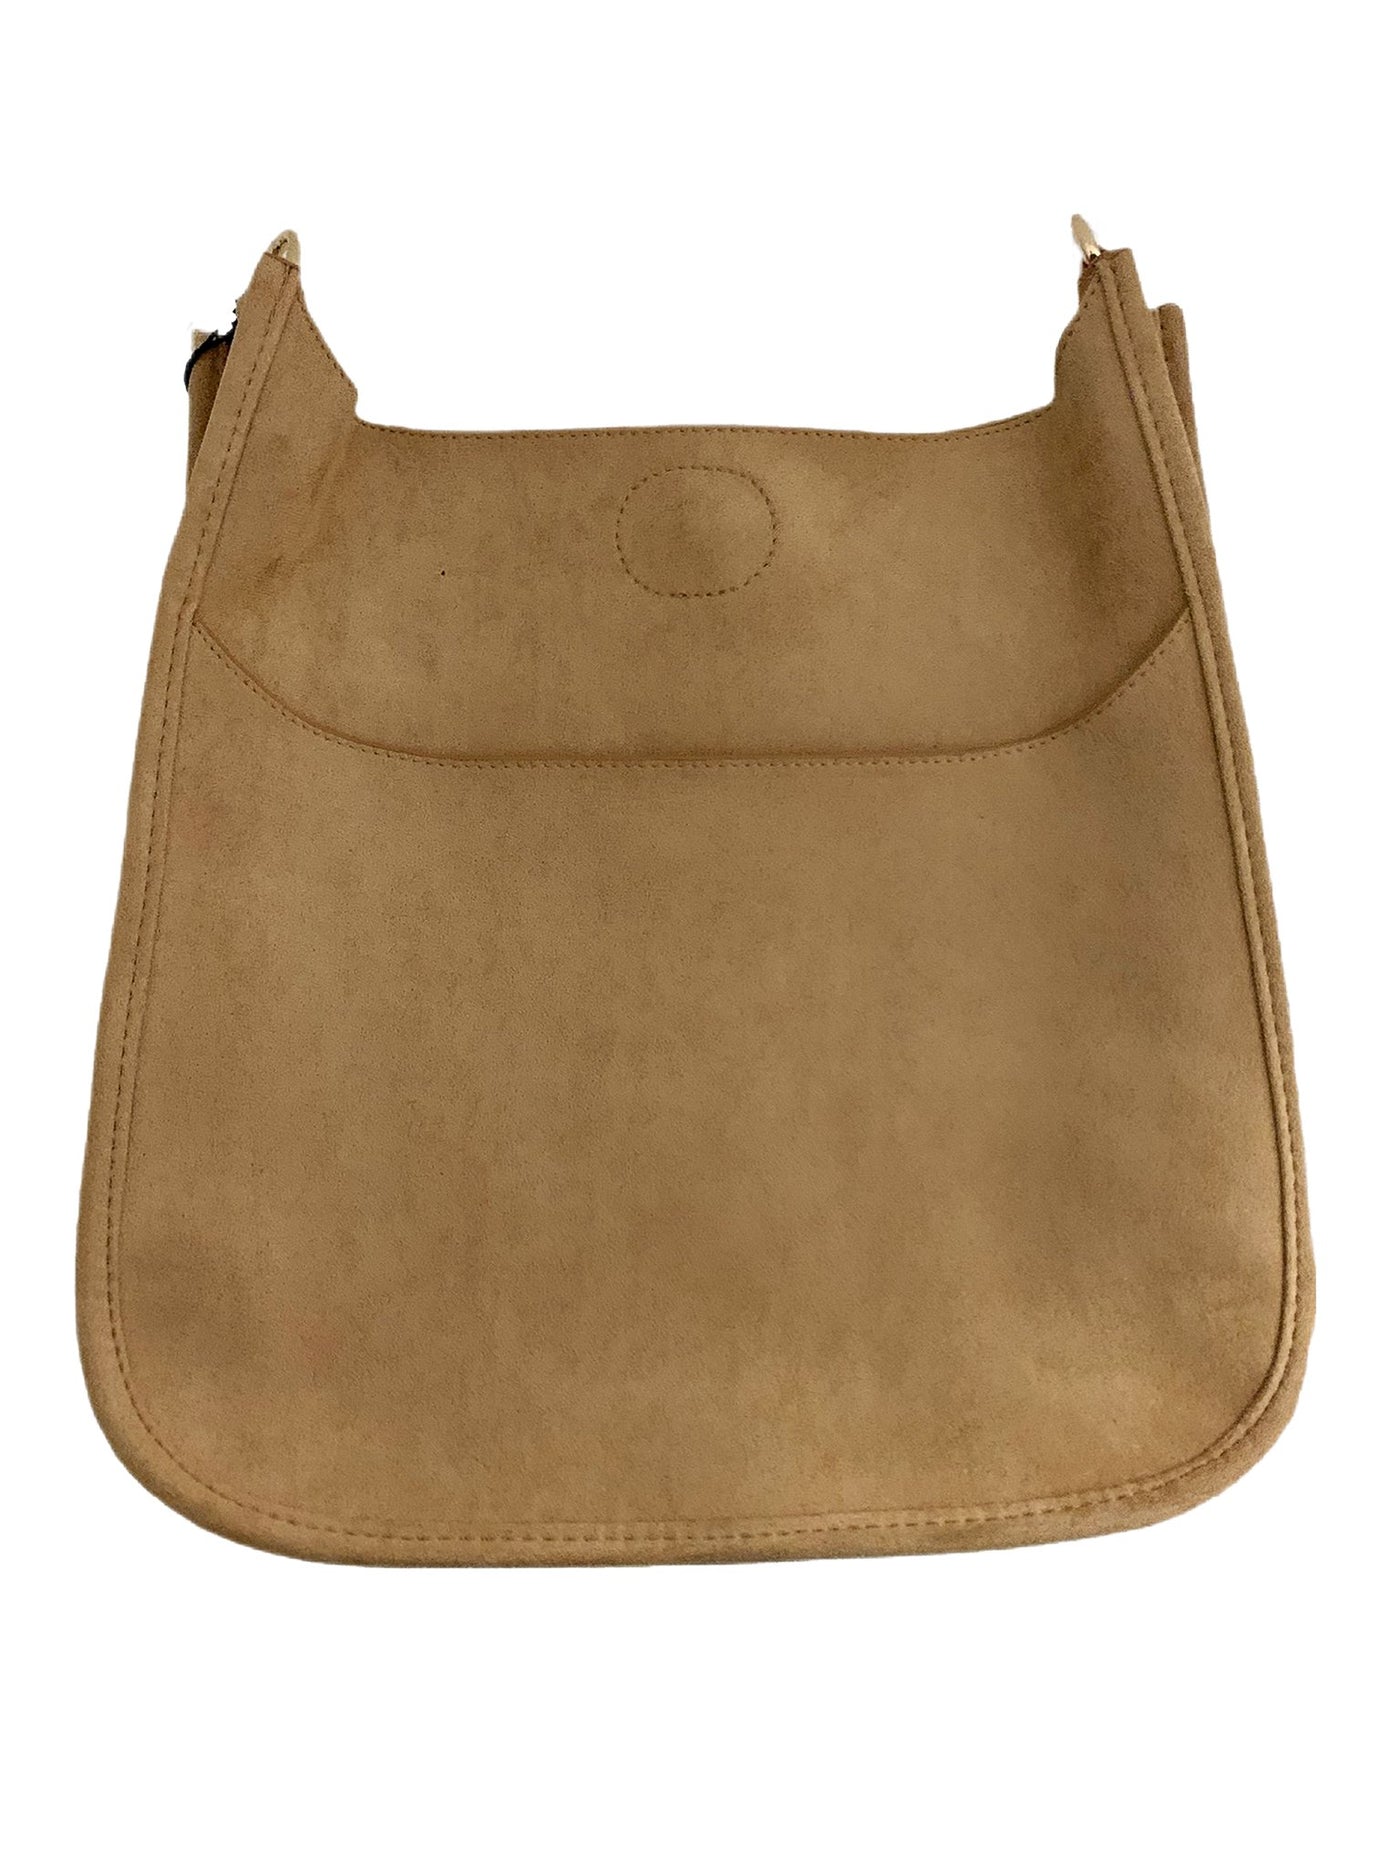 Suede Classic Messenger Camel w/Gold Hardware - Ahdorned - NO STRAP